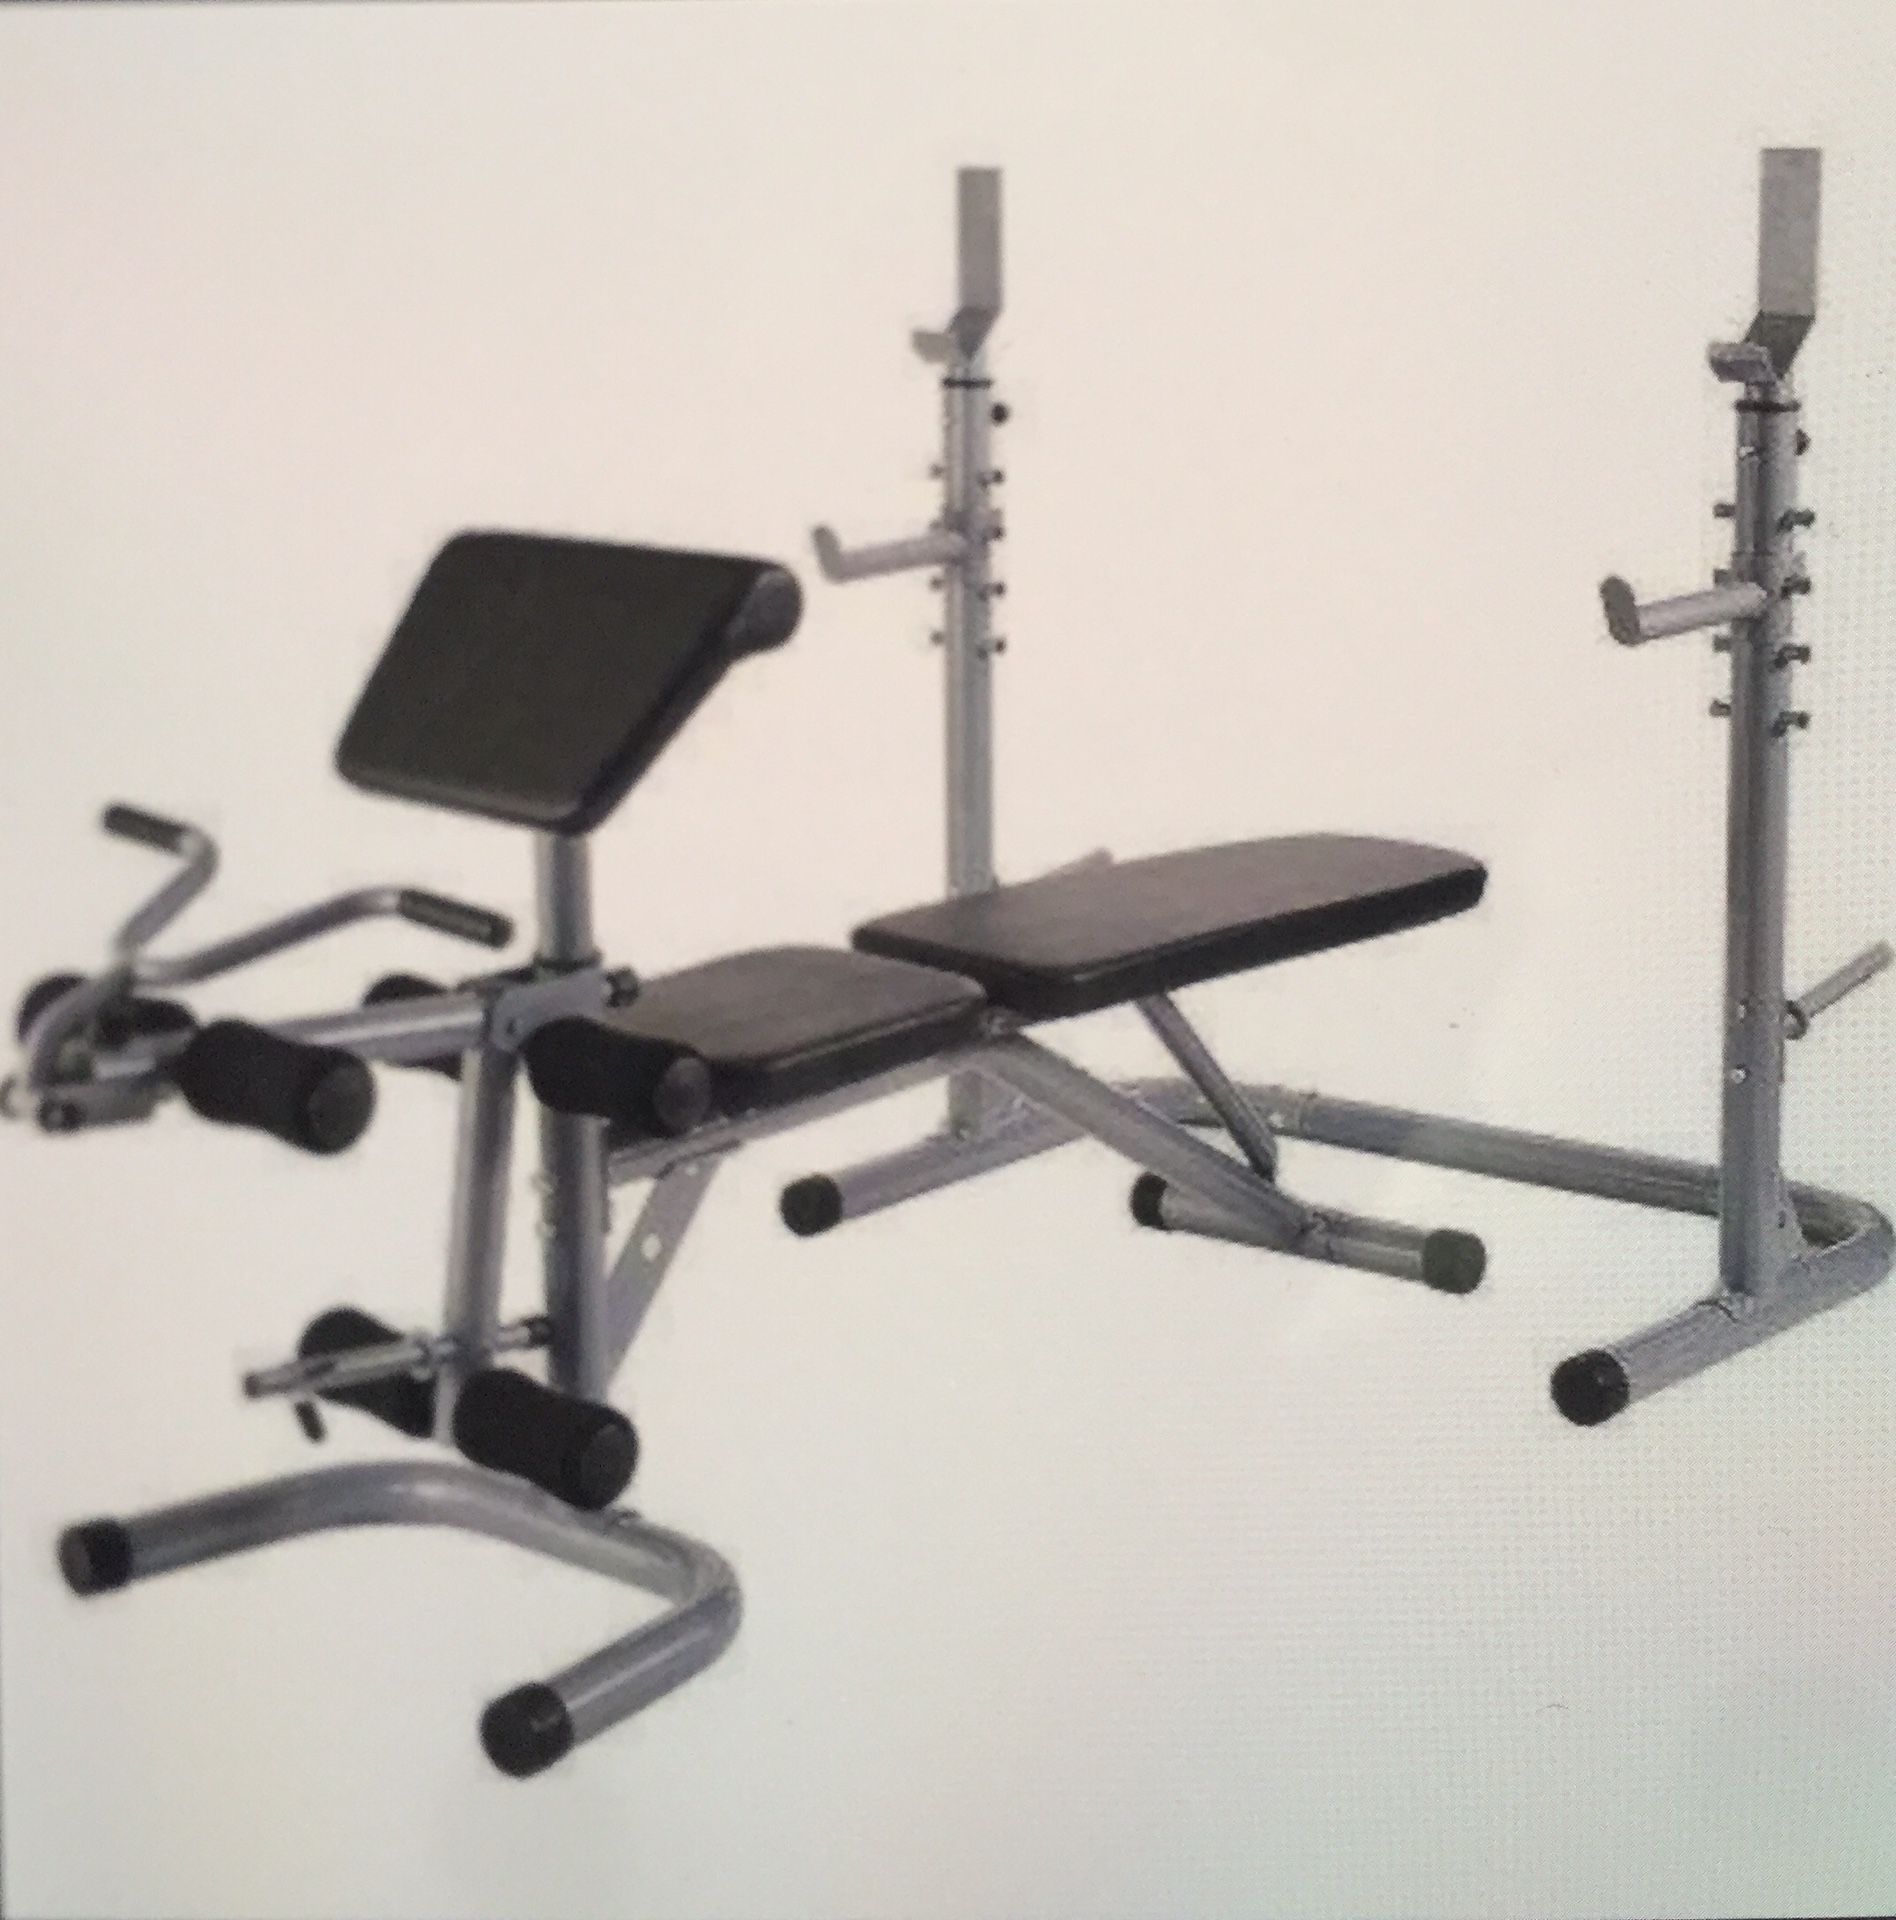 WORKOUT STATION ADJUSTABLE OLYMPIC WORKOUT BENCH WITH SQUAT RACK